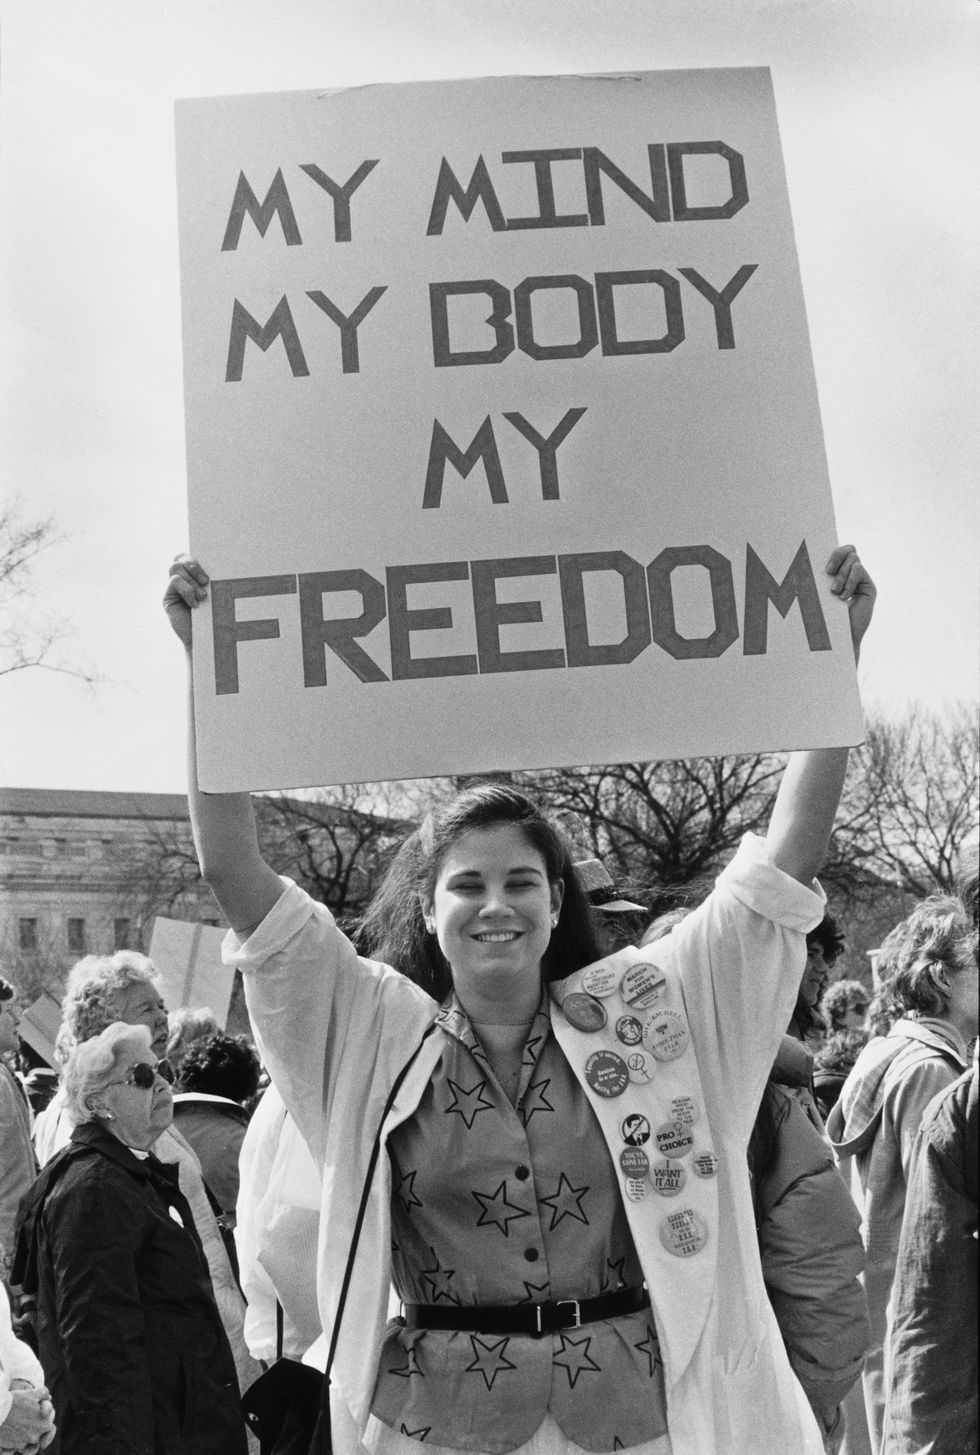 pro choice campaigners at a national march for womens lives in washington dc, 9th march 1986 photo by barbara alpergetty images